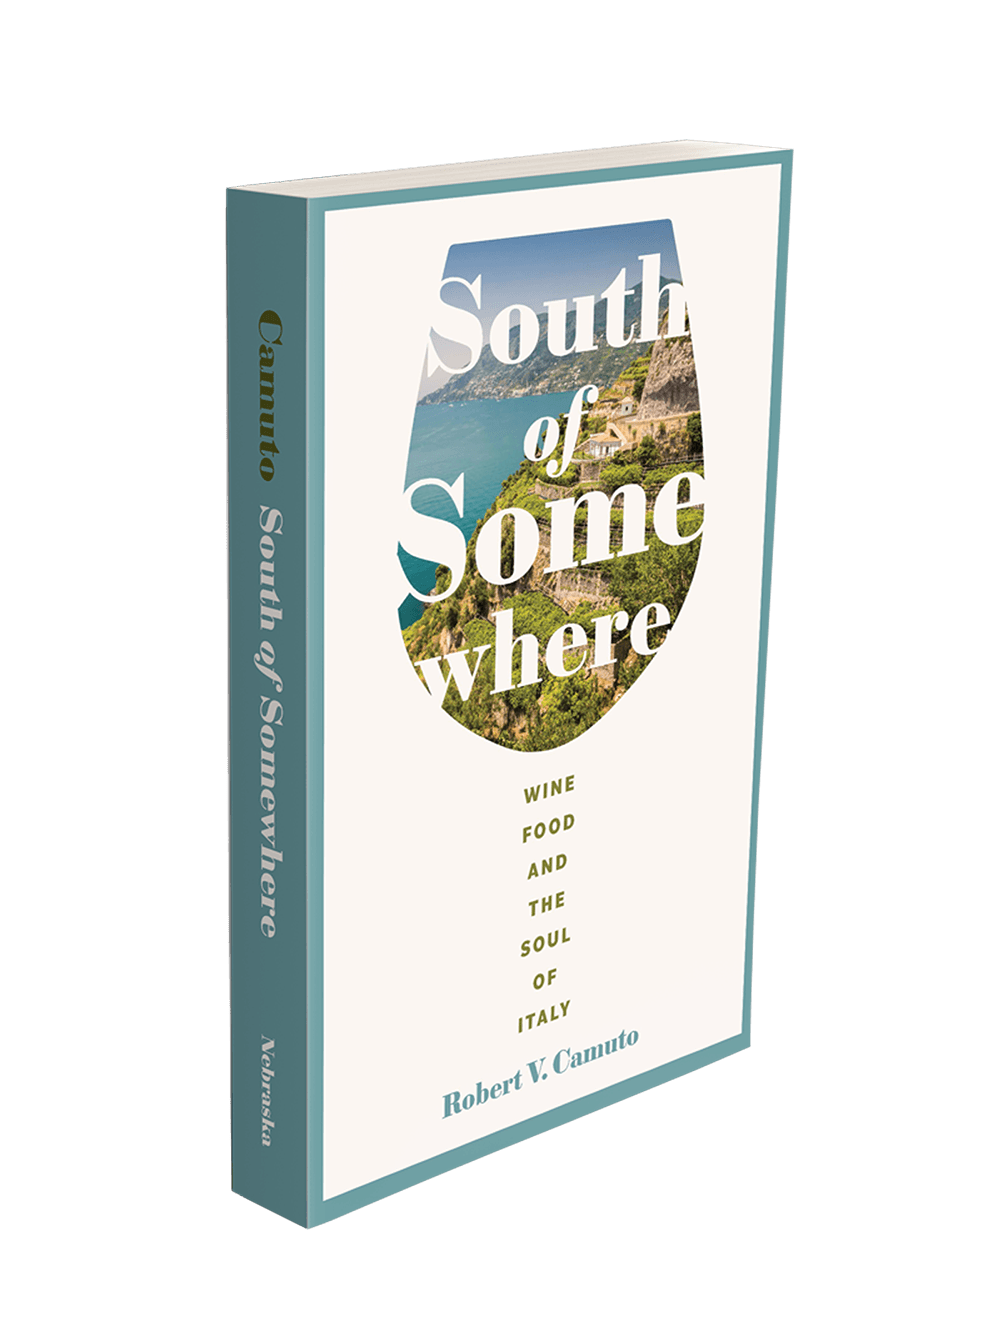 South of Somewhere by Robert Camuto